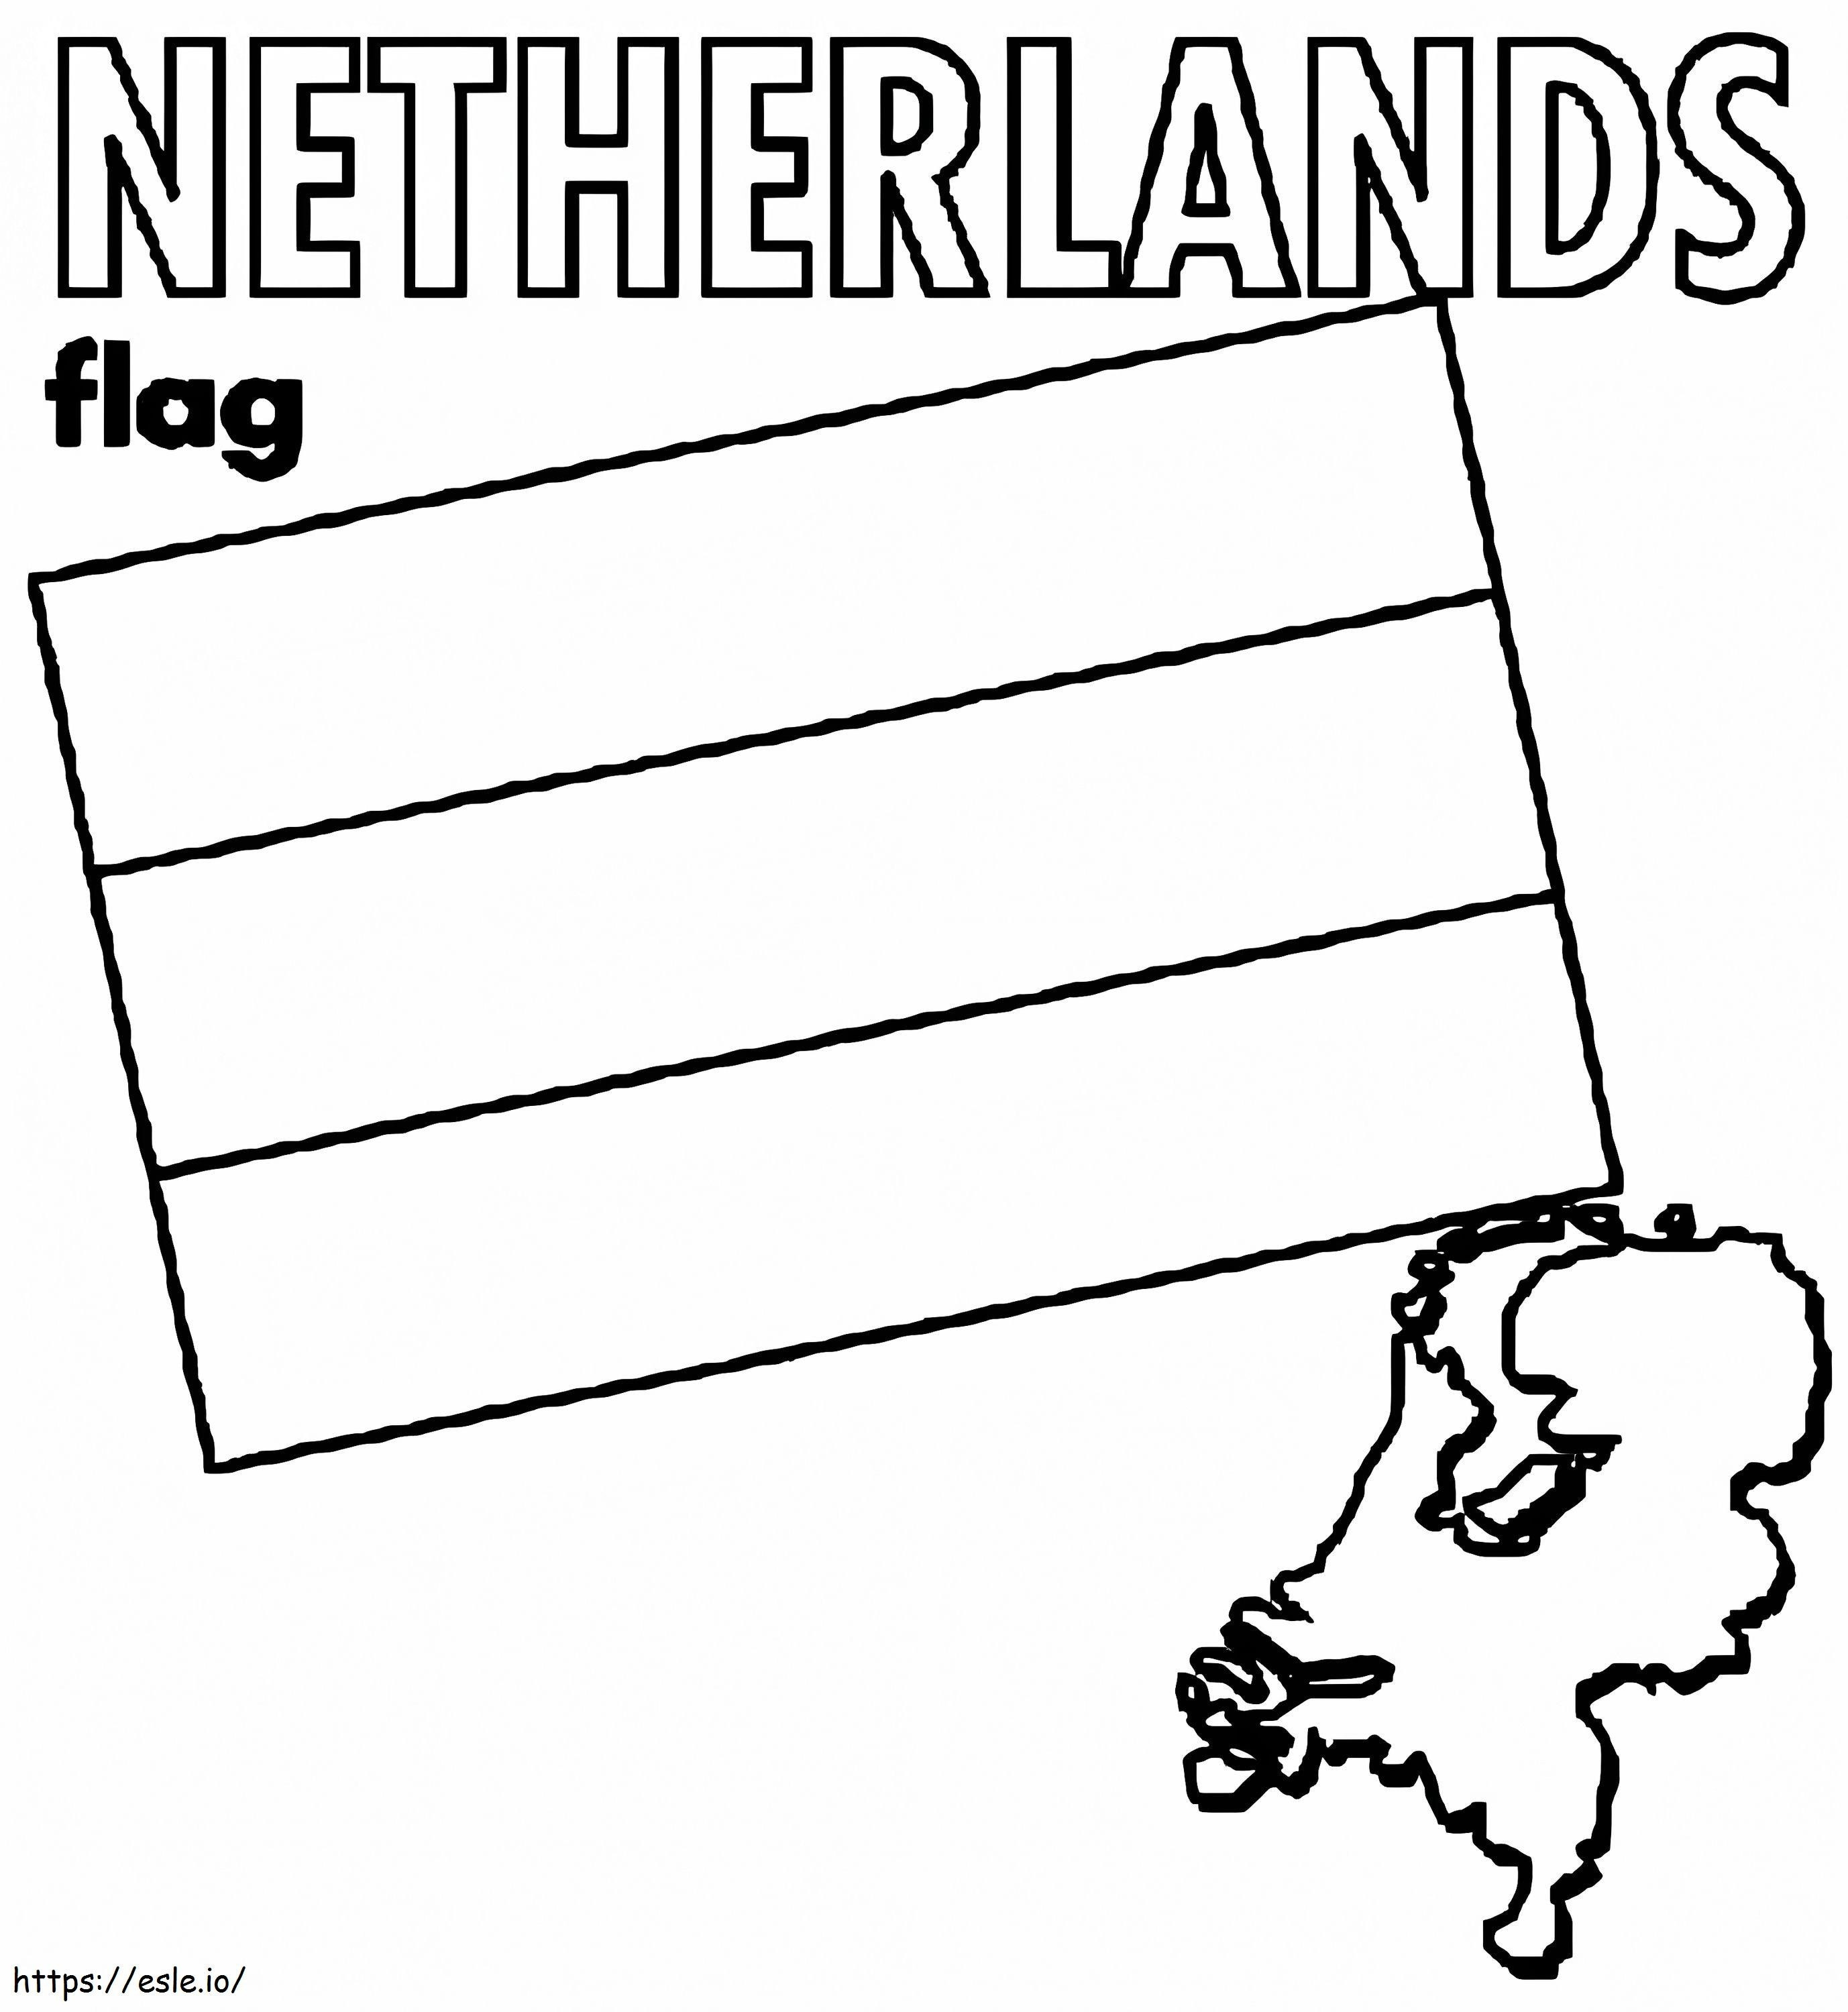 Netherlands Flag coloring page